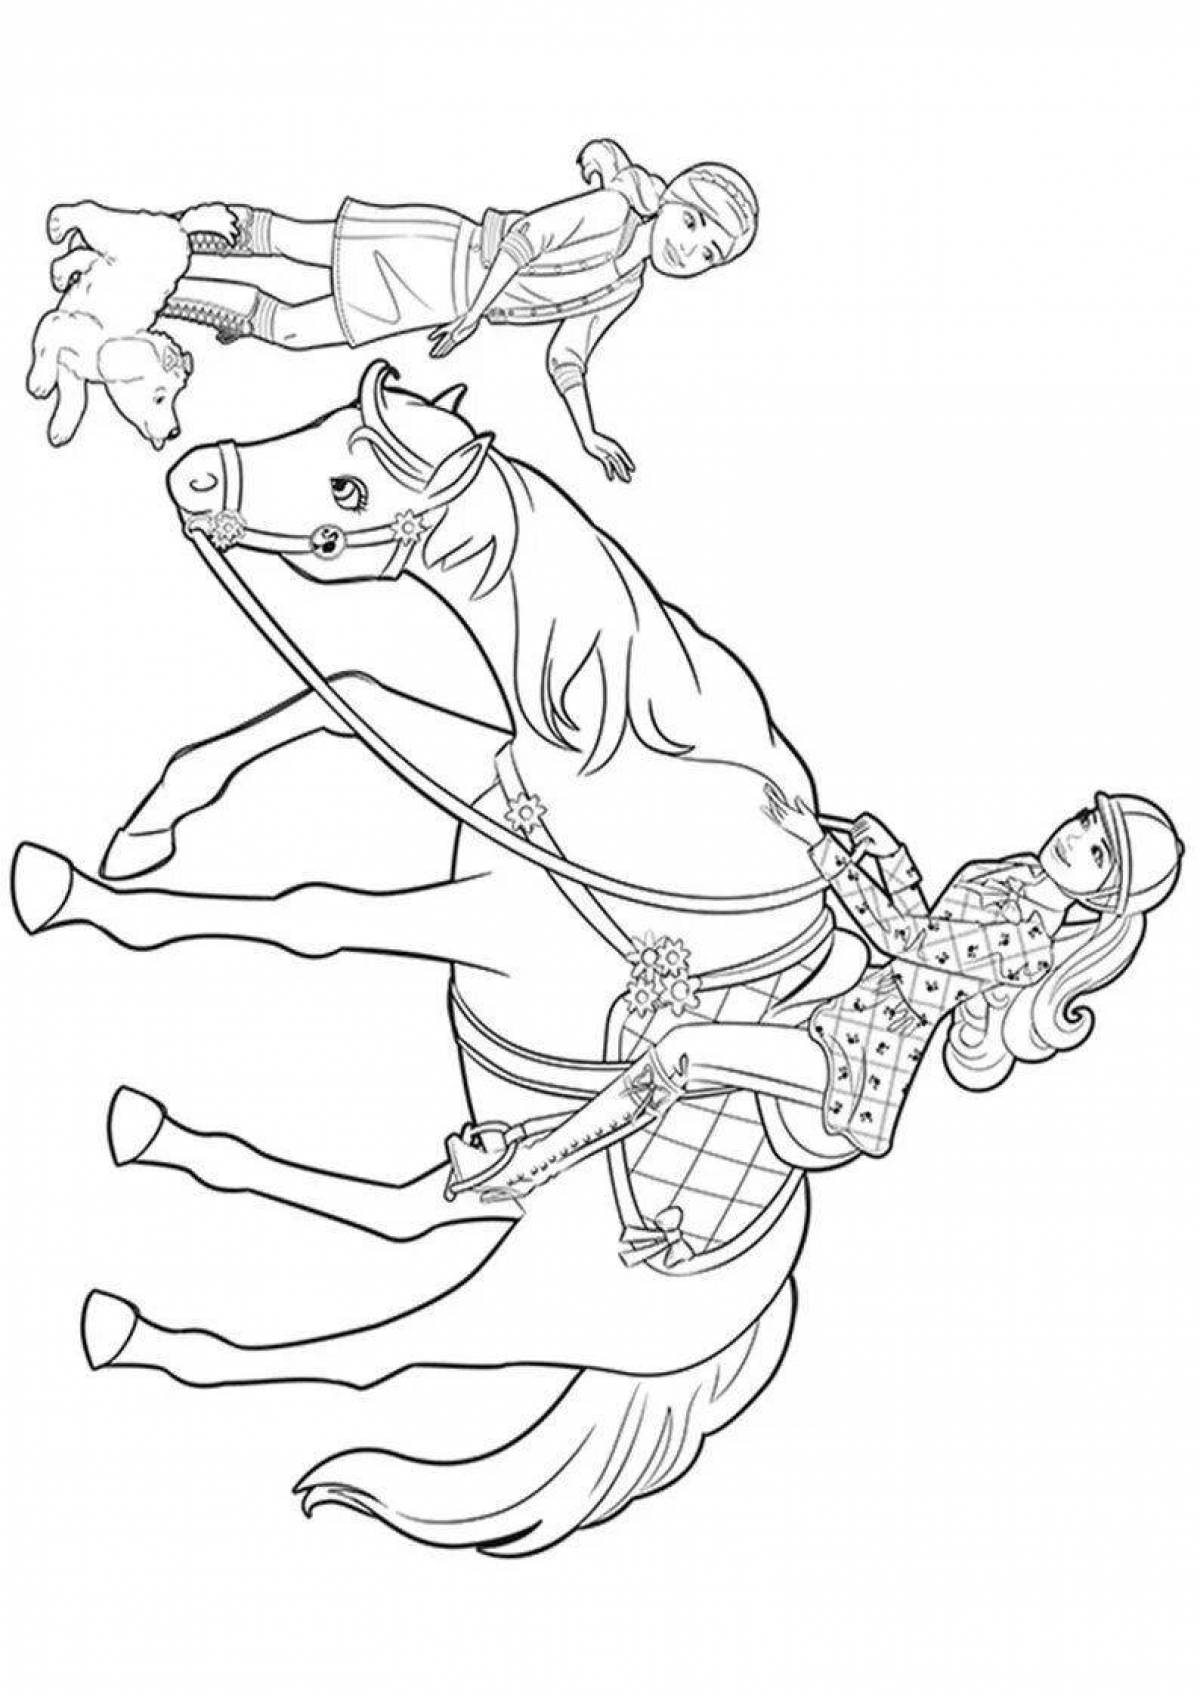 Coloring page charming barbie on a horse